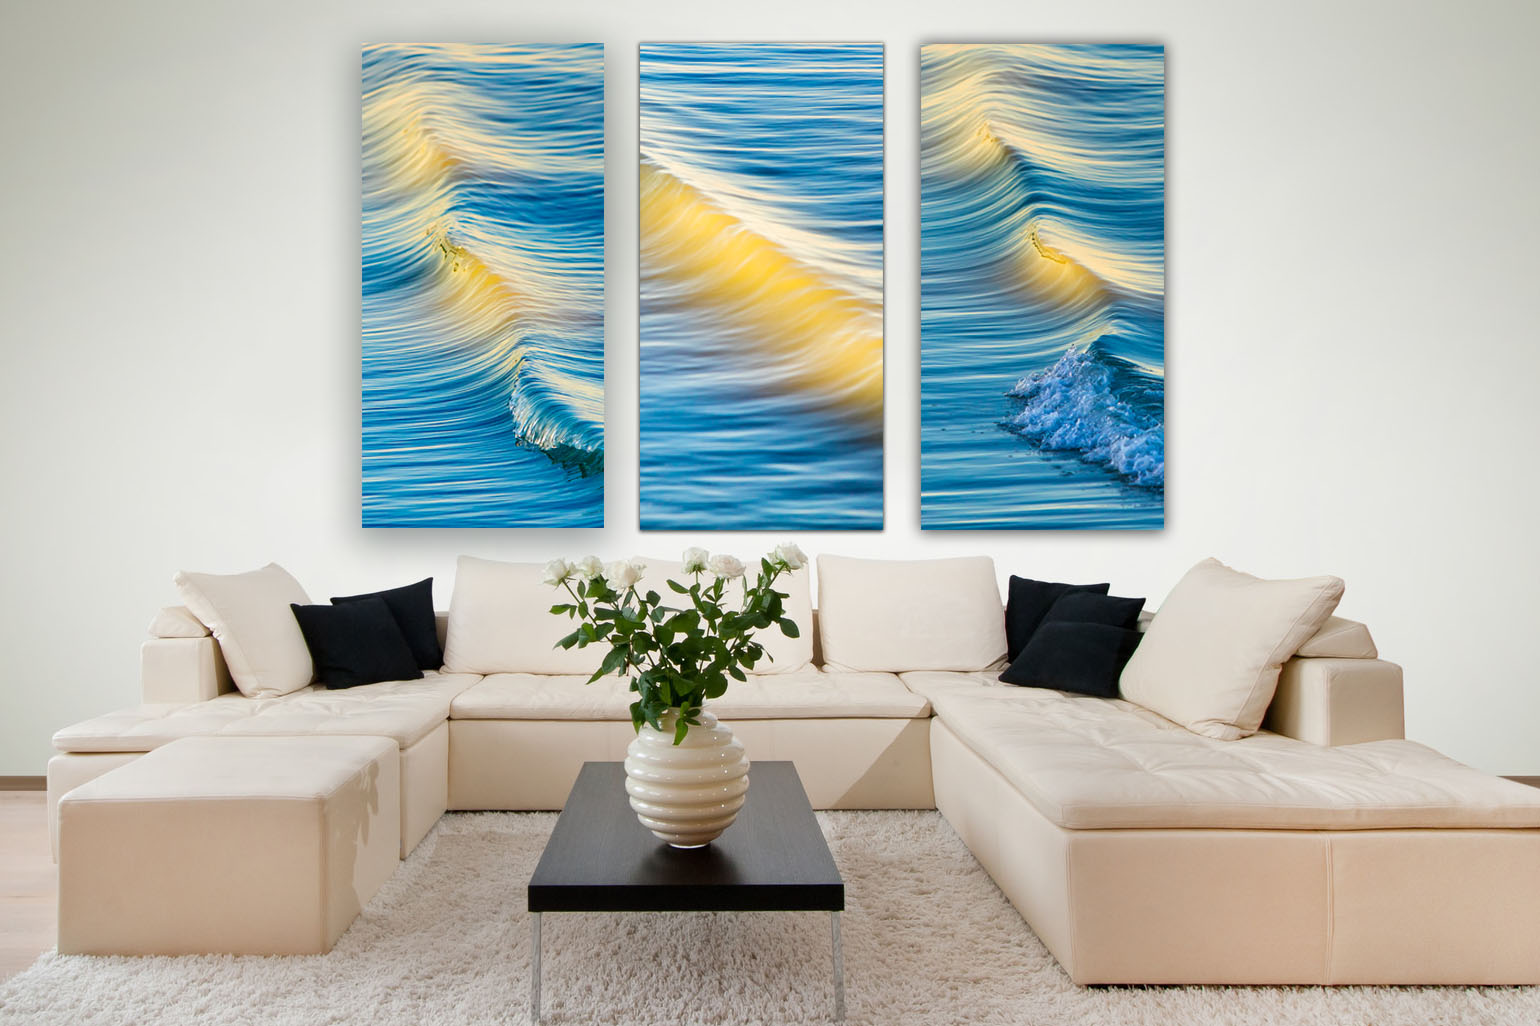 The triptych comes in 2 different sizes. Each Panel is 20" x 30" or 30" x 45". Bring the ocean art to your wall.